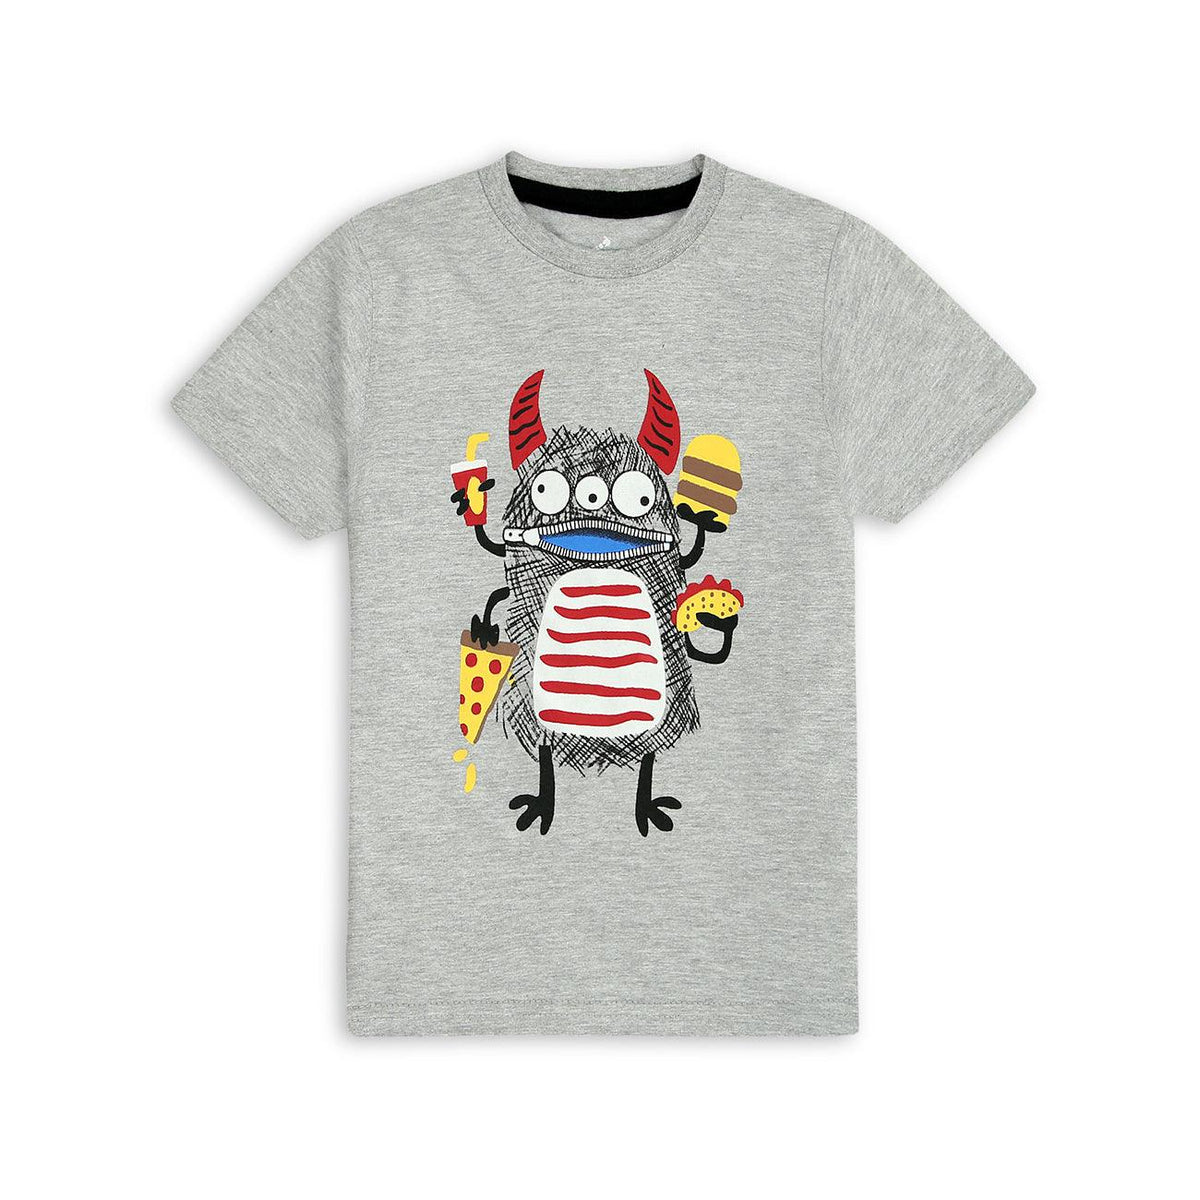 Gray Soft Cotton Printed T-Shirt For Boys  9 MONTH - 10 YRS (MI-11119) - Brands River